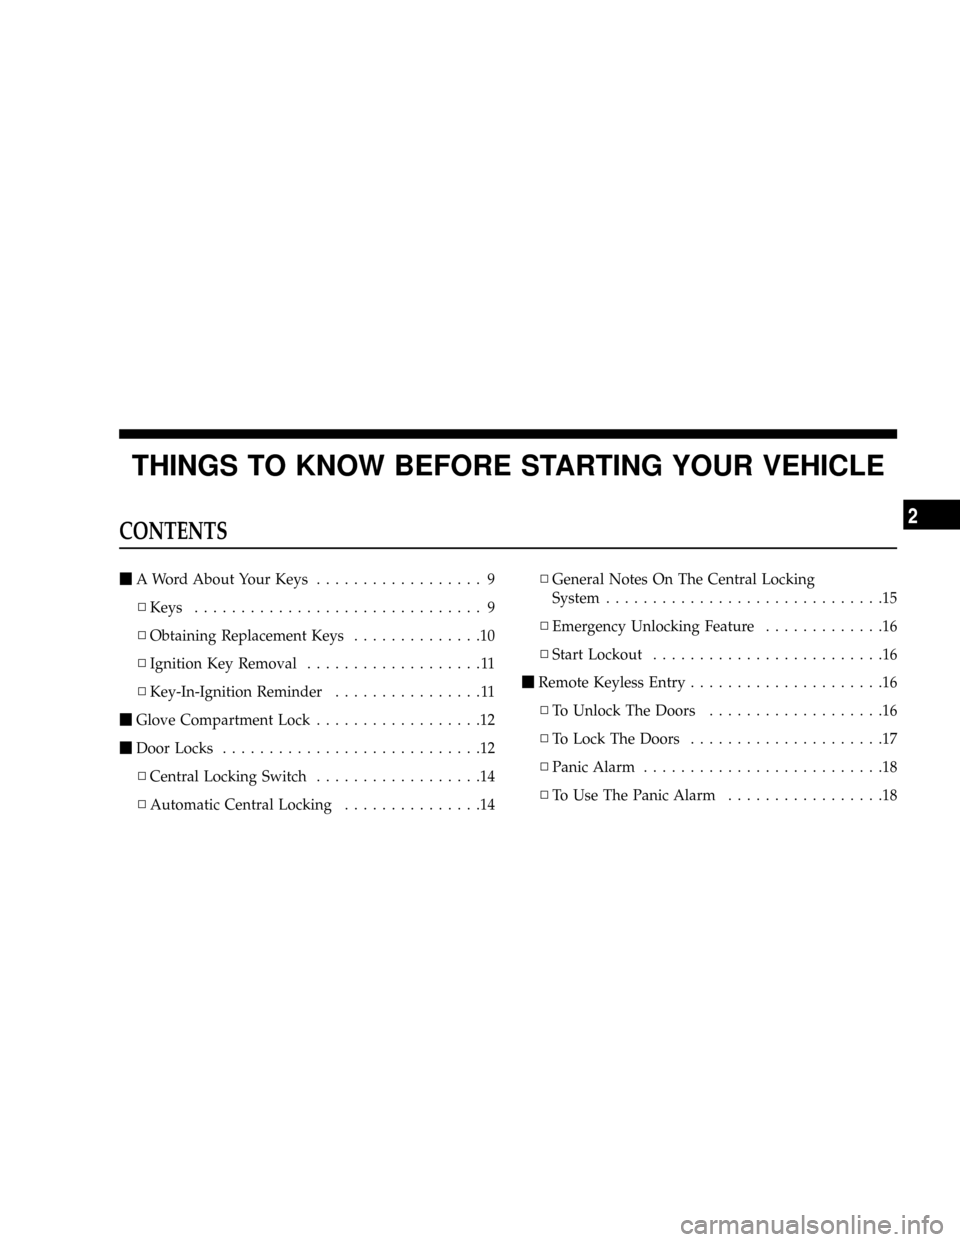 CHRYSLER CROSSFIRE 2008 1.G Owners Manual THINGS TO KNOW BEFORE STARTING YOUR VEHICLE
CONTENTS
mA Word About Your Keys.................. 9
NKeys............................... 9
NObtaining Replacement Keys..............10
NIgnition Key Remova